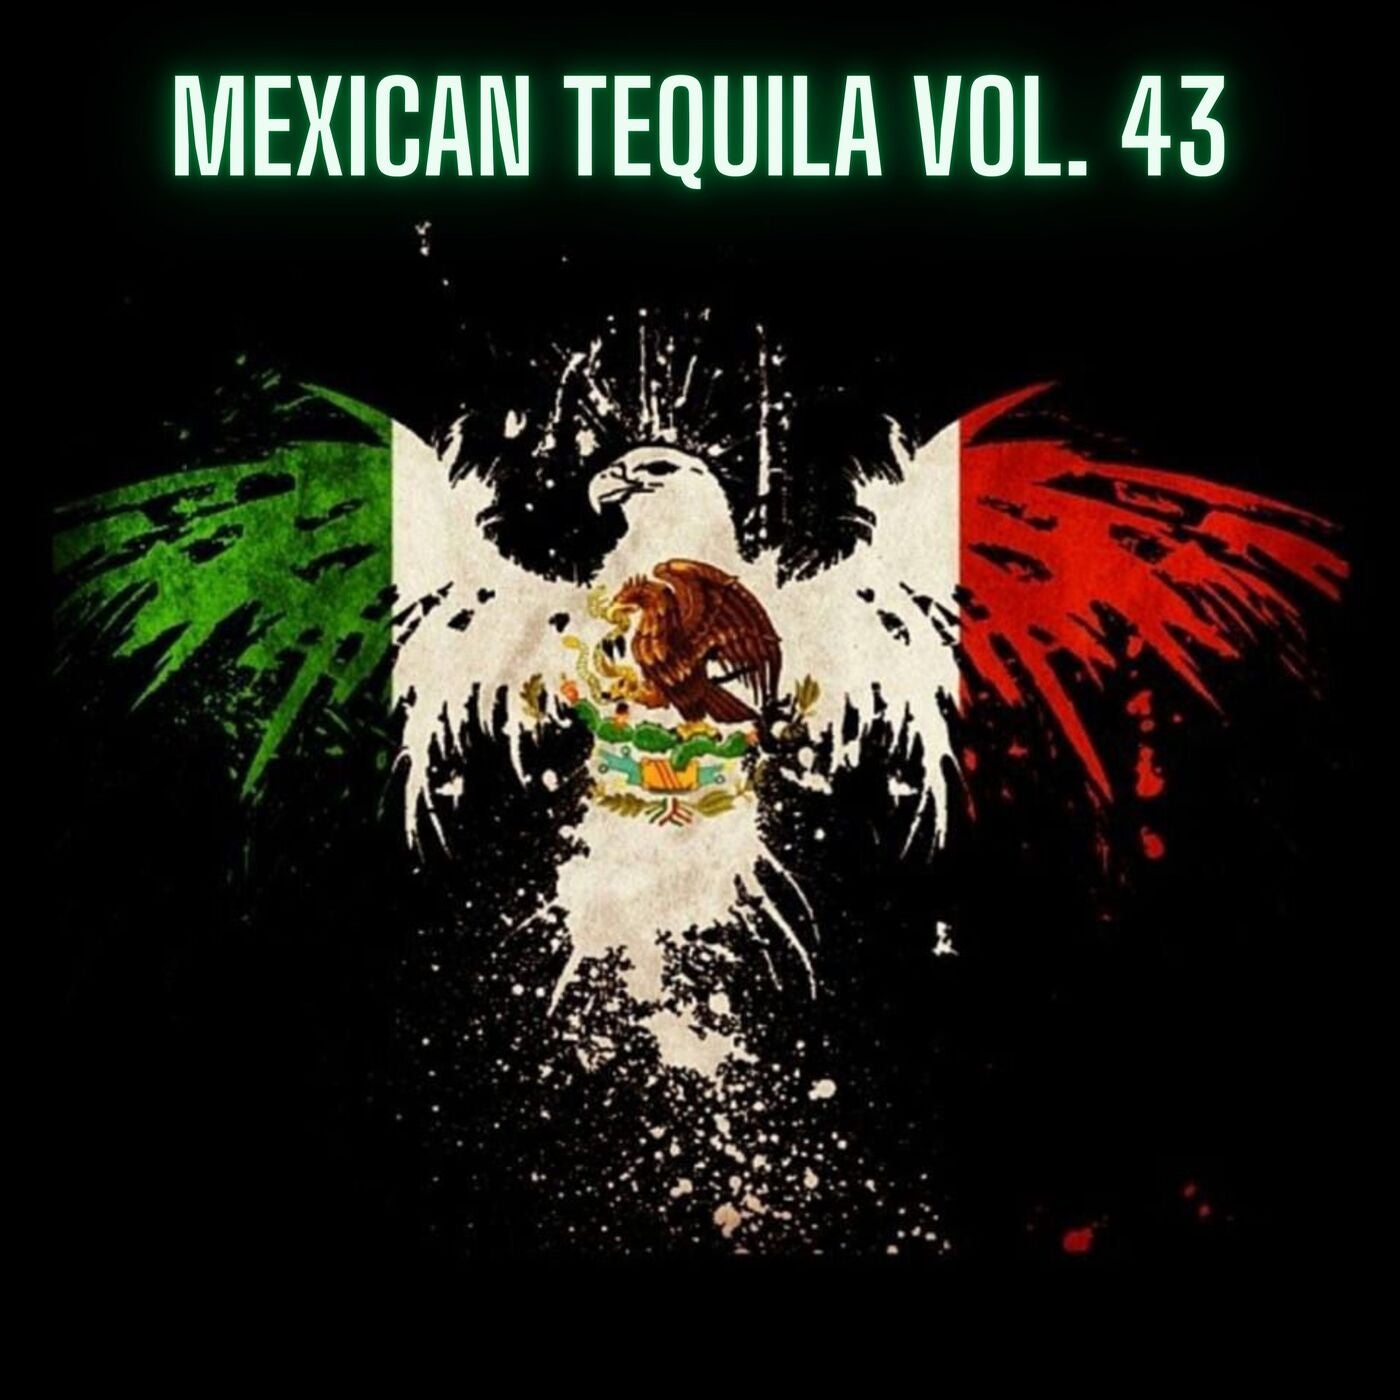 Mexican Tequila Vol. 43